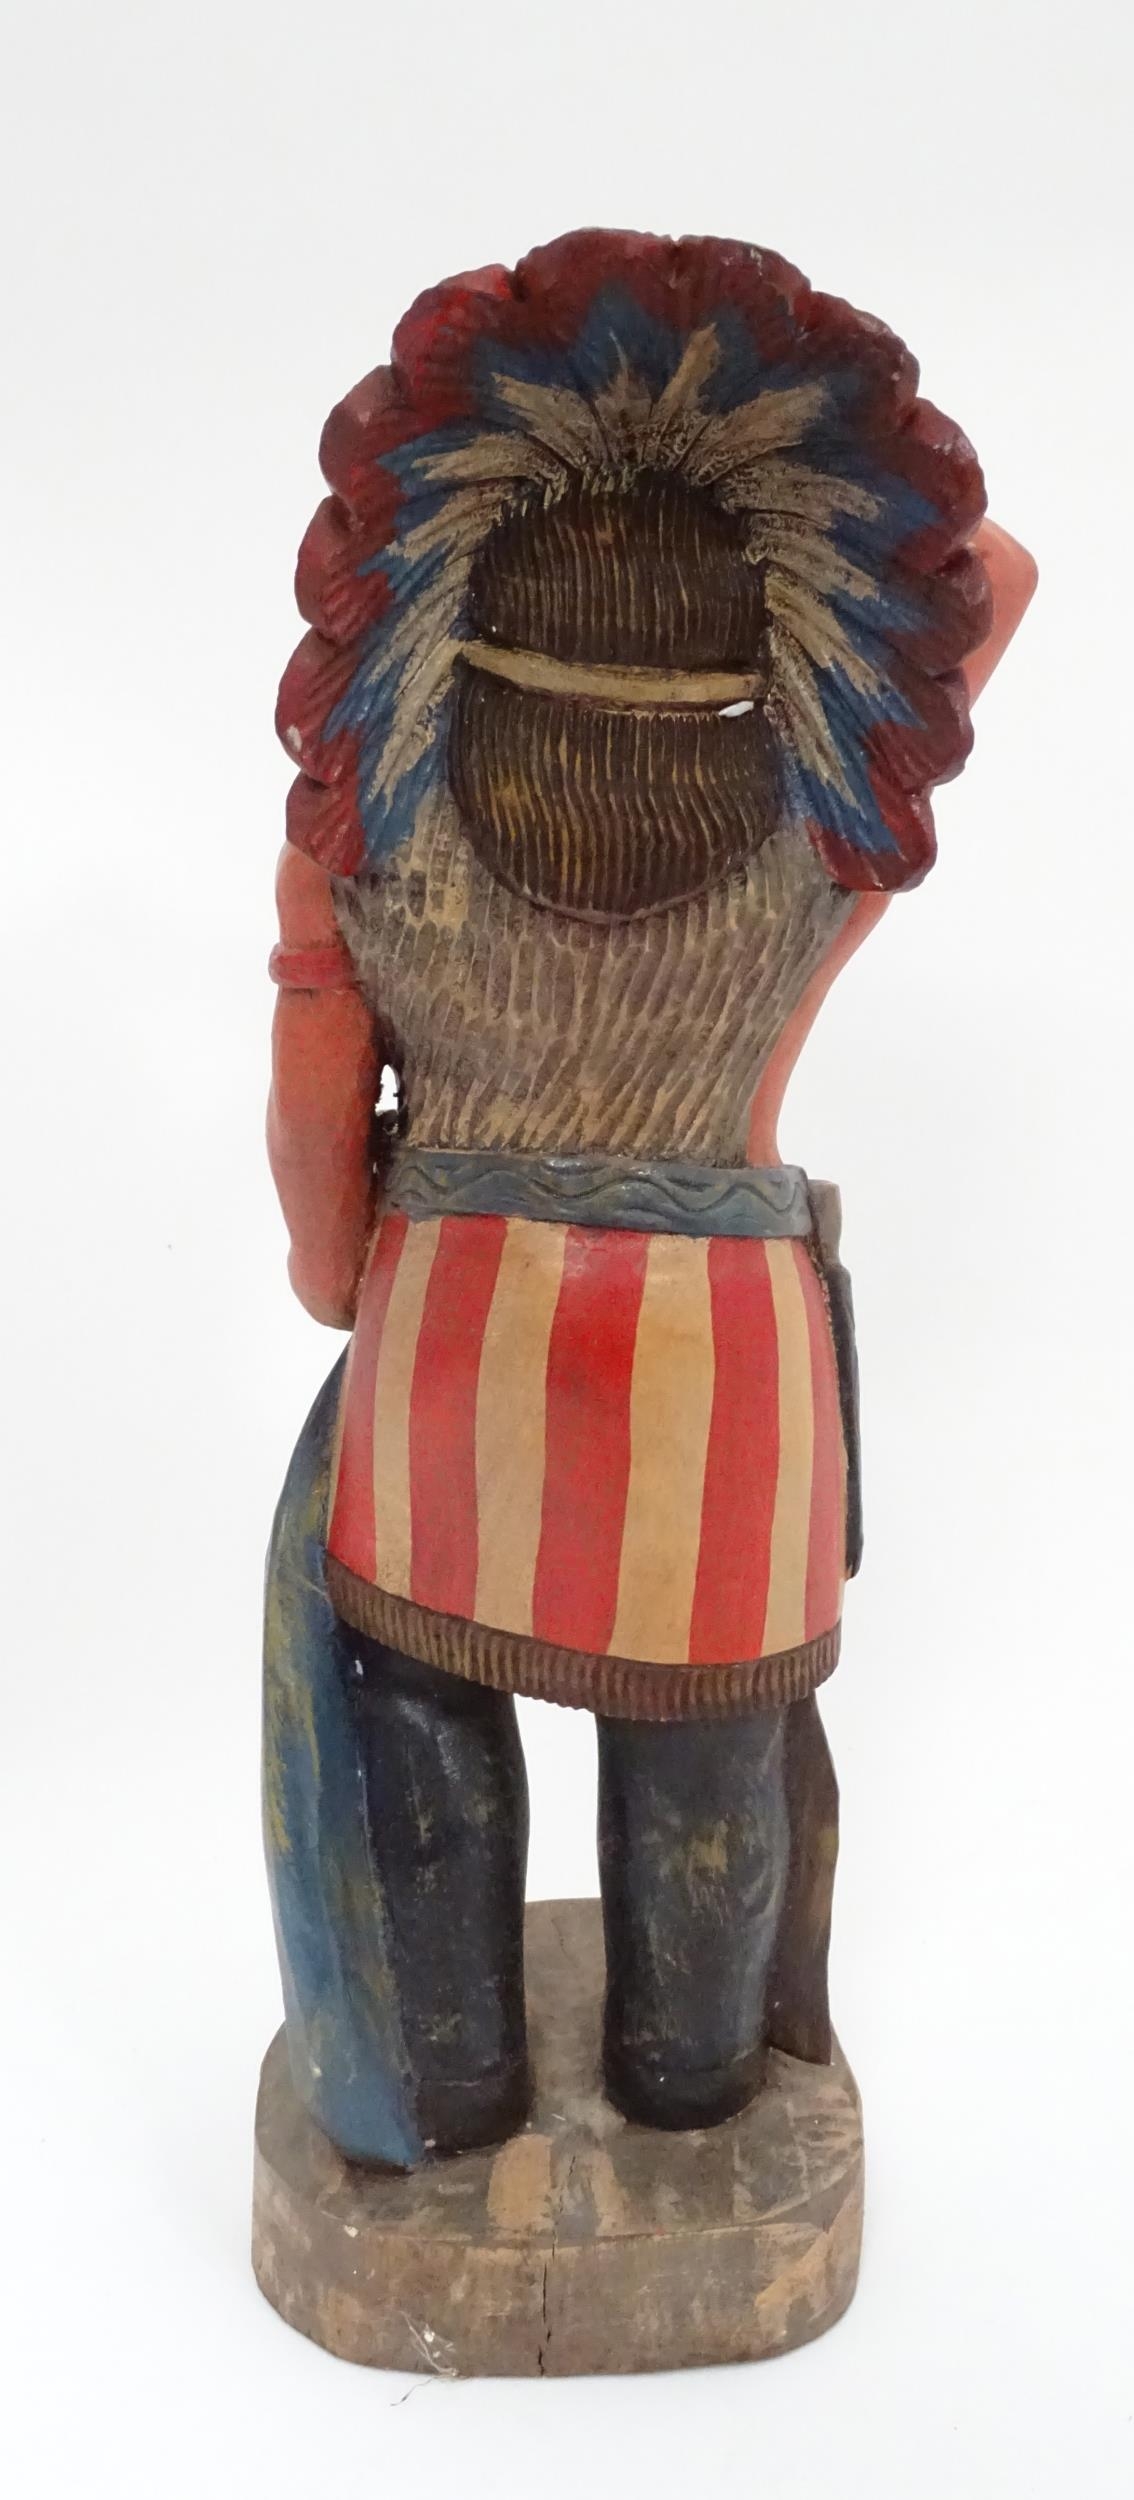 Late 20thc miniature tobacco advertising figure. Approx. 24 1/2" high - Image 5 of 5